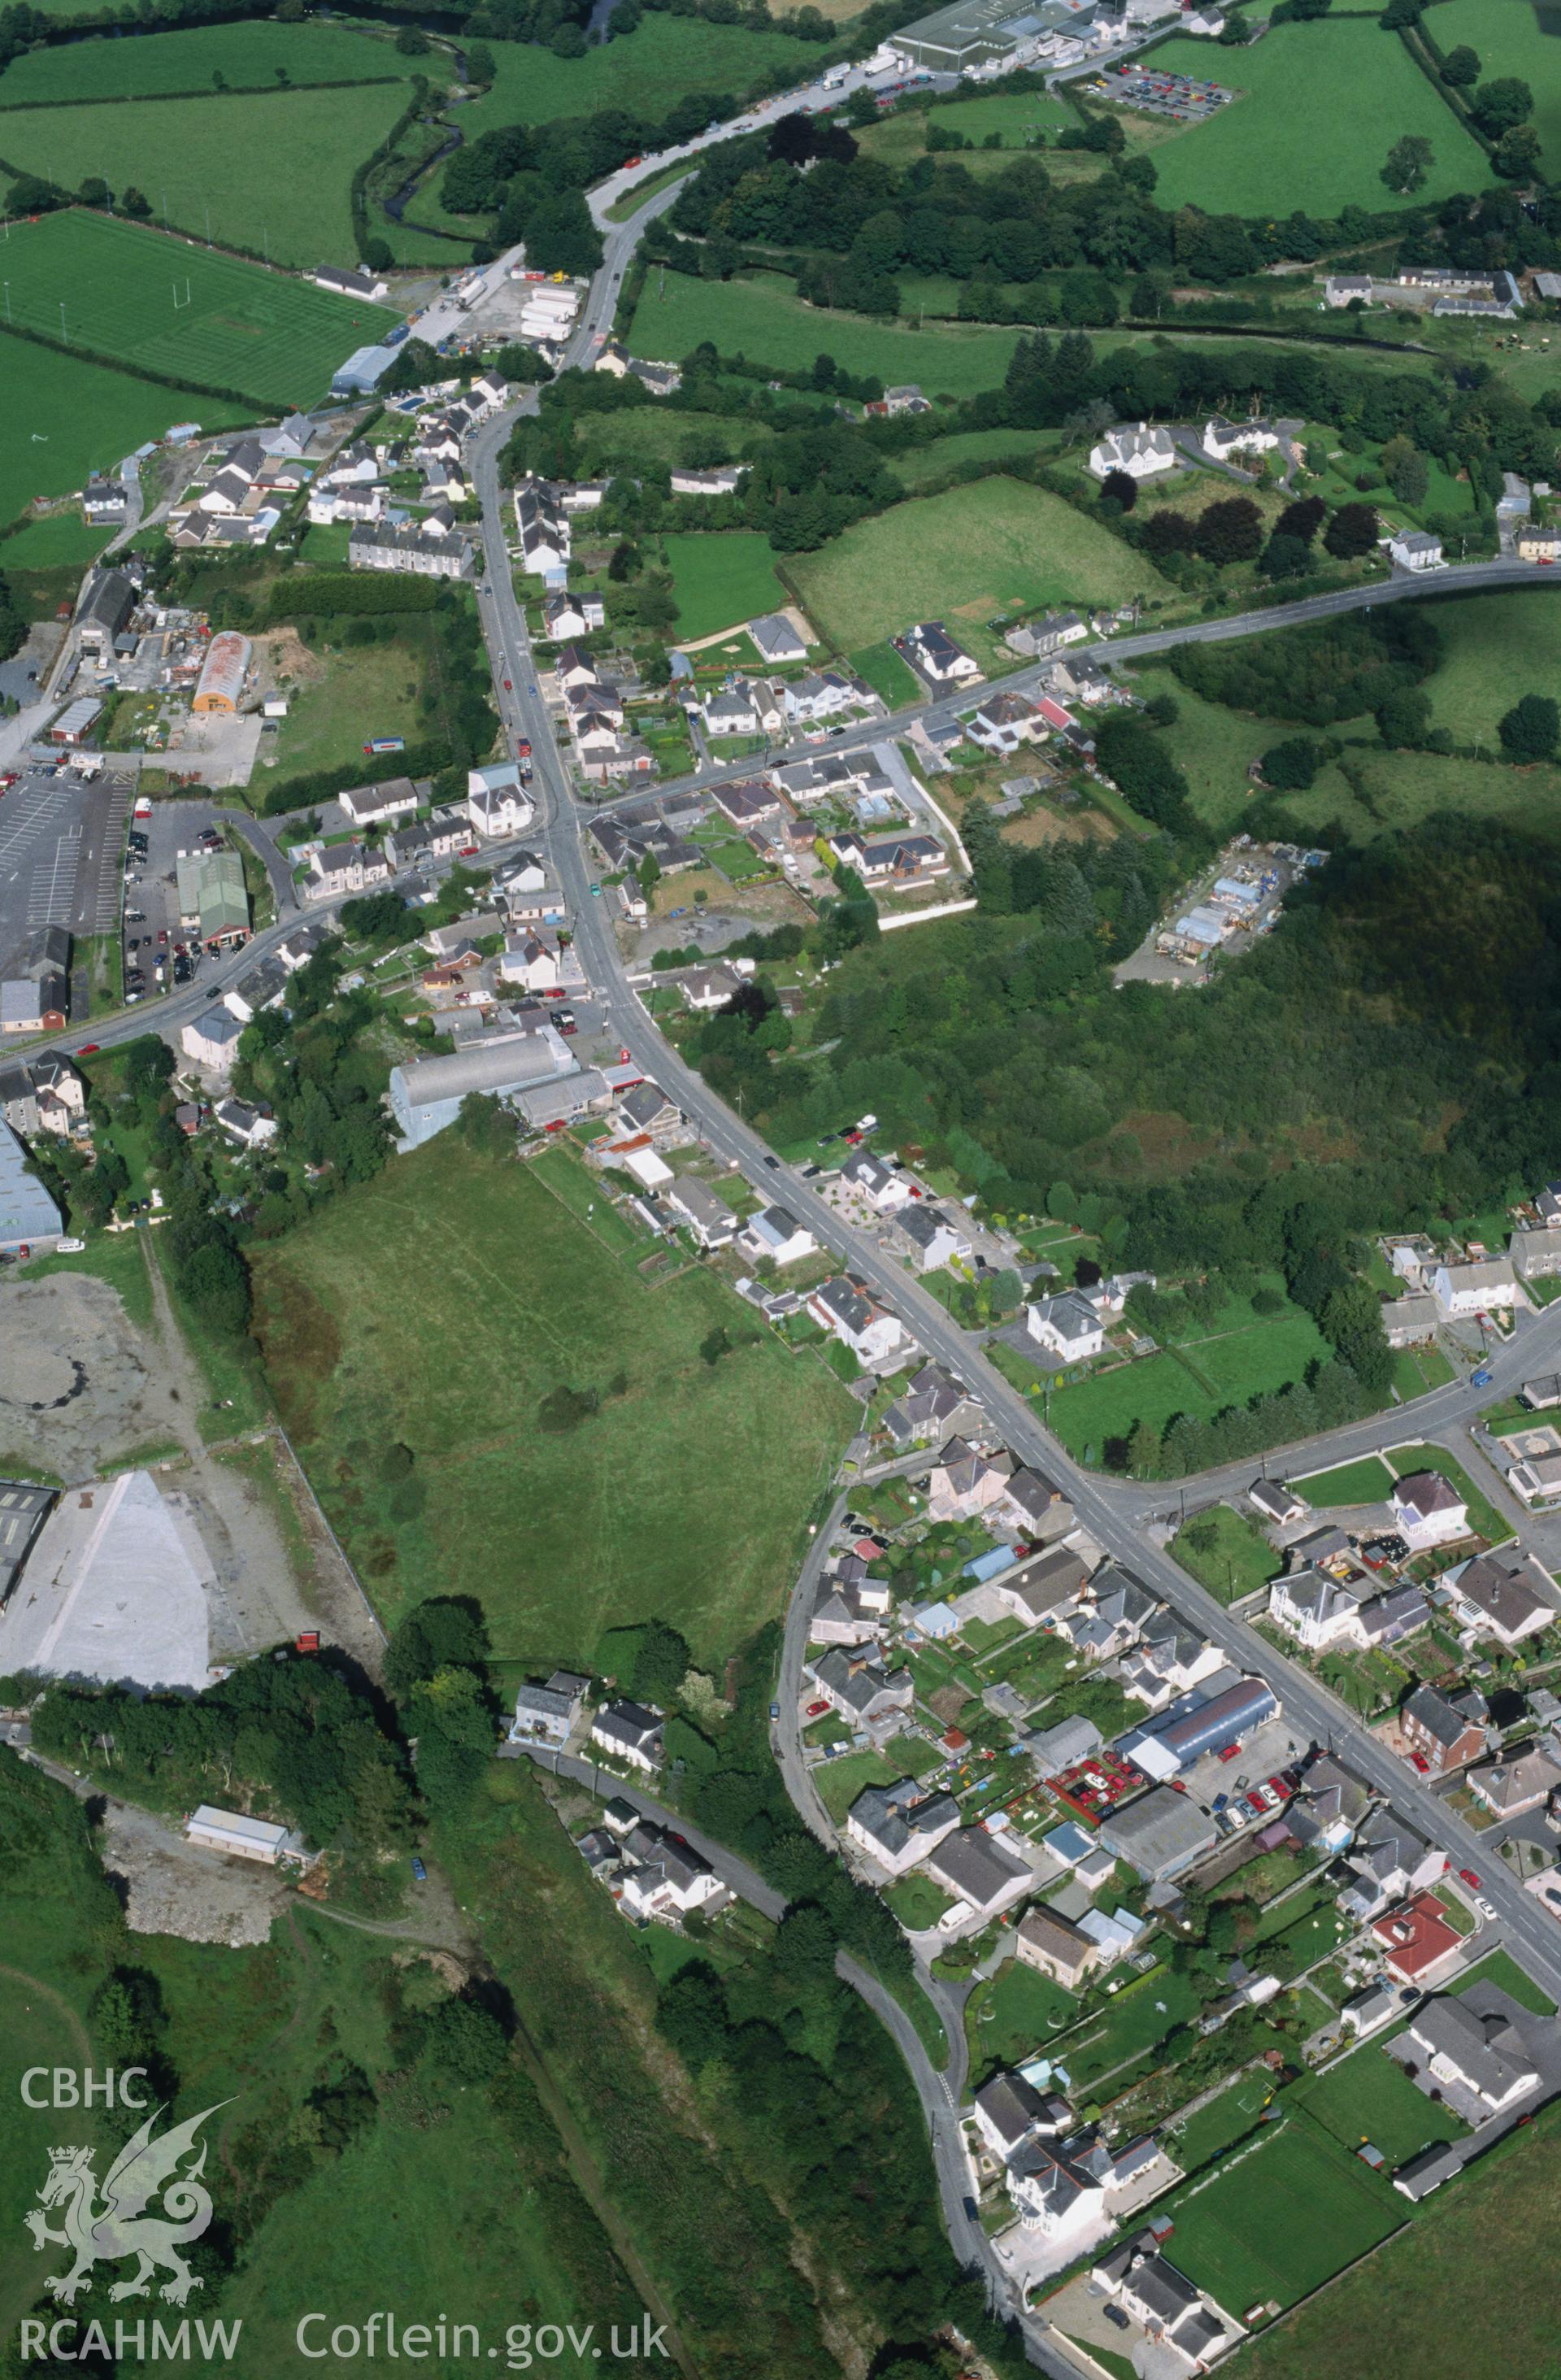 Slide of RCAHMW colour oblique aerial photograph of Llanybydder;llanybyther, taken by T.G. Driver, 4/9/2001.